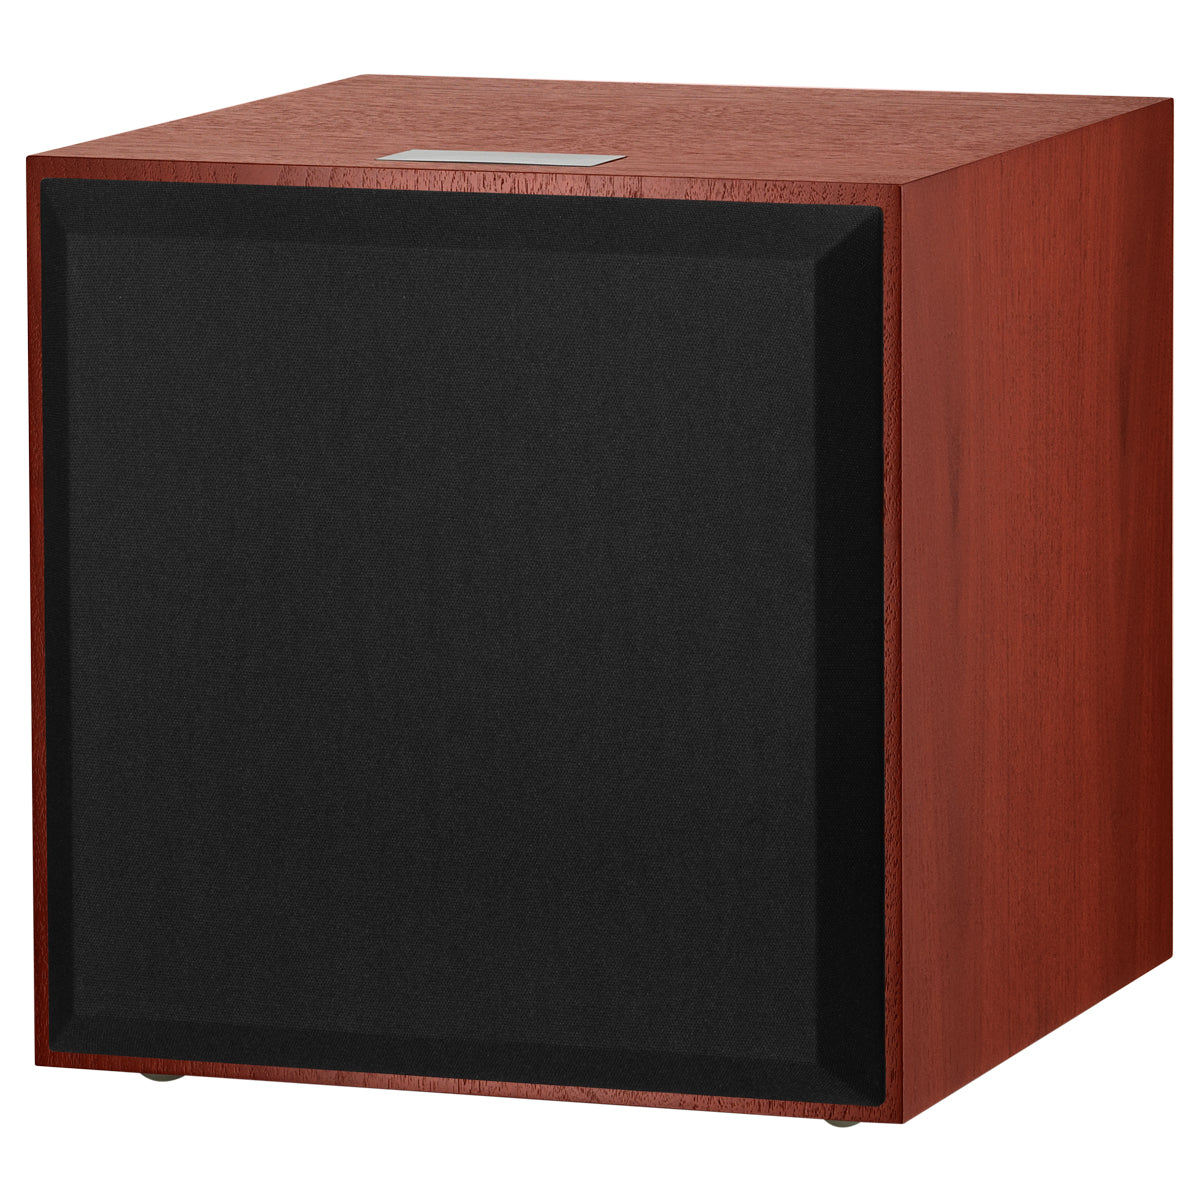 Bowers & Wilkins DB4S 10" Active Subwoofer - Rosenut - The Audio Experts